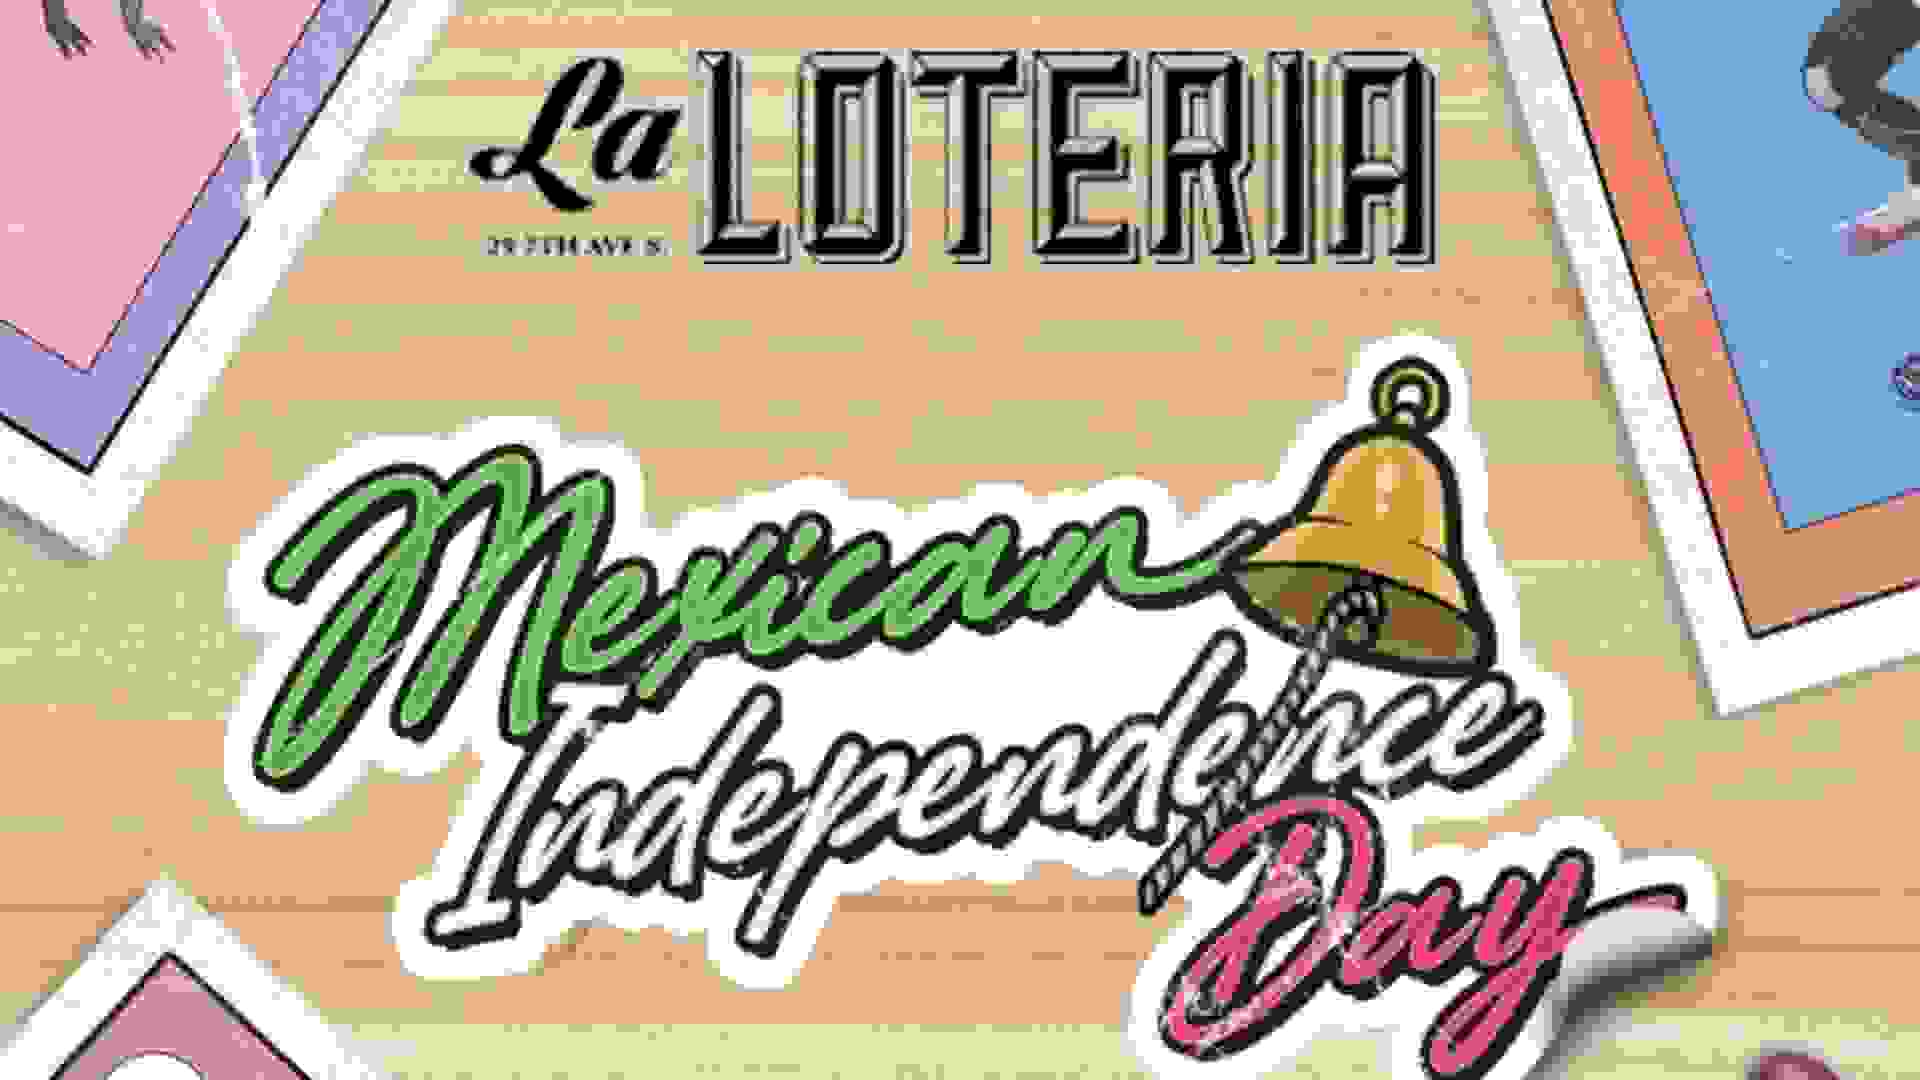 Fiesta at La Loteria NYC / Mexican Independence Day